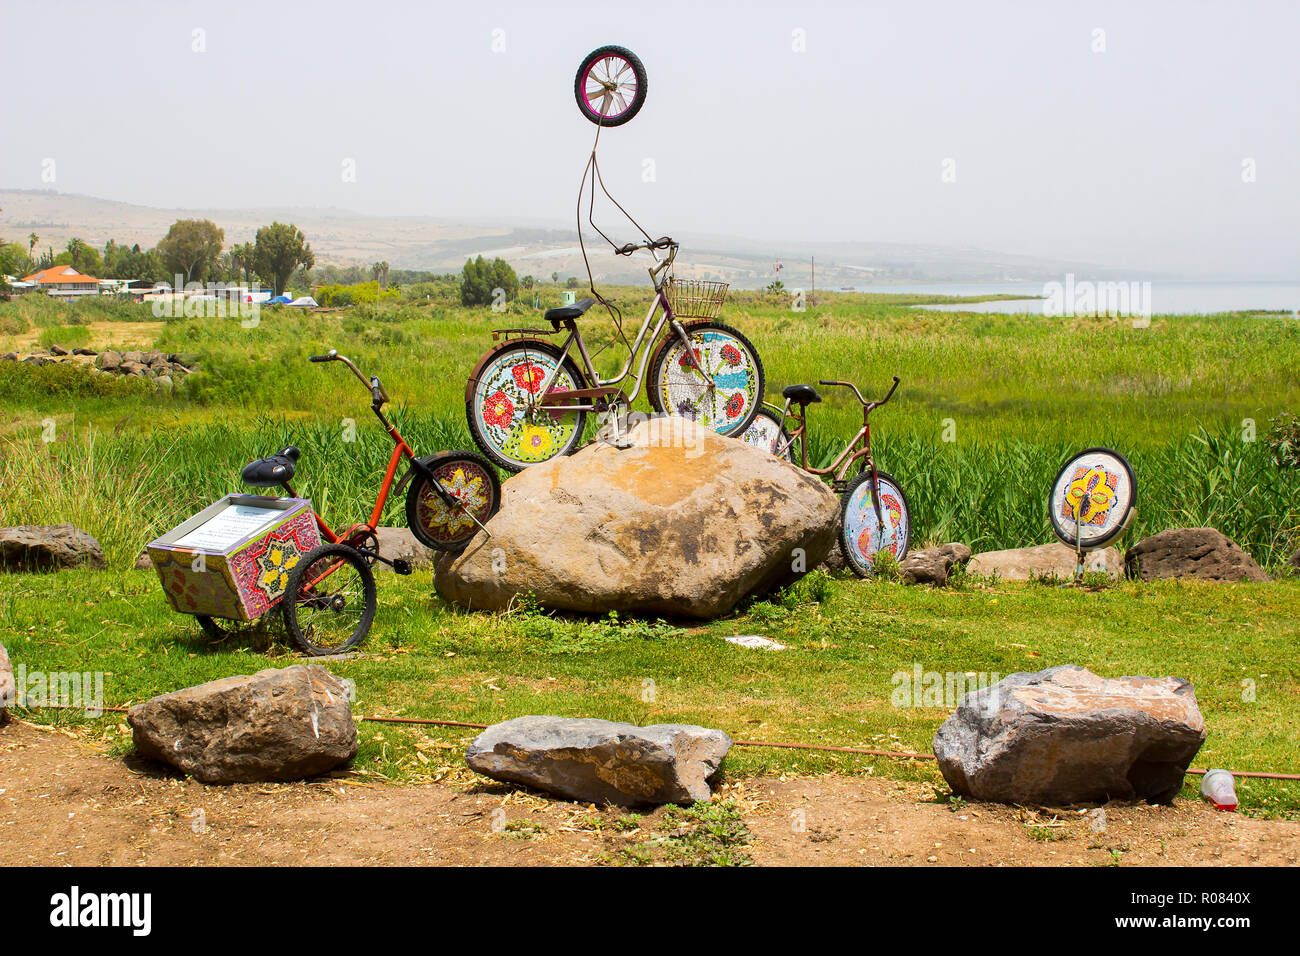 3 May 2018 A Psychedelic art installation themed on cycles and pushbikes at the Yigal Allon Centre on the shore of the Sea of Gallilee in Israel Stock Photo